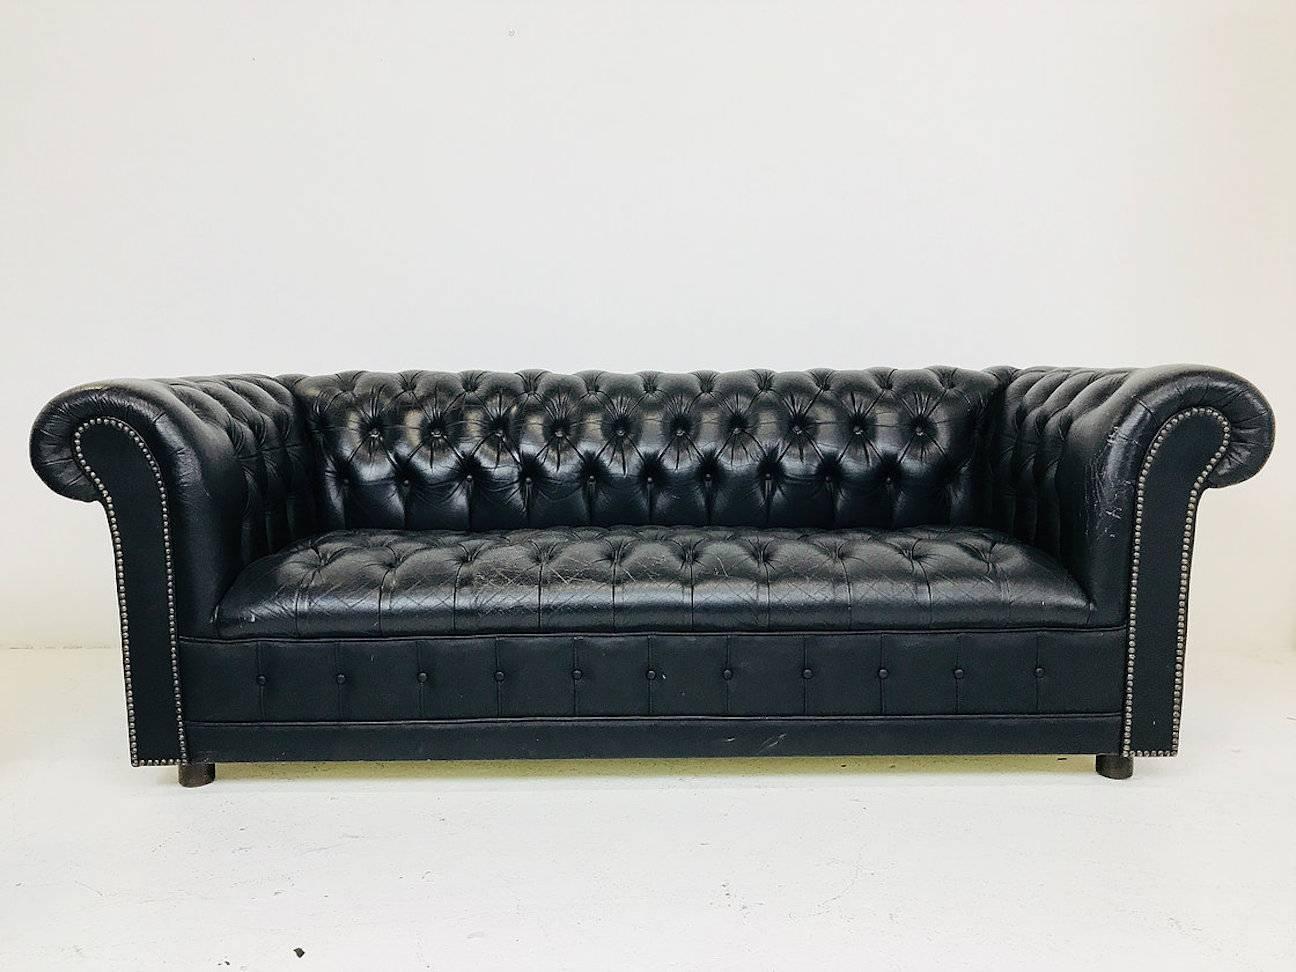 Pair of vintage black leather Chesterfield settees. Leather is worn and has an aged patina. Can be used as is for a aged warm look or have them upholstered for a more modern feel.

Dimensions: 77